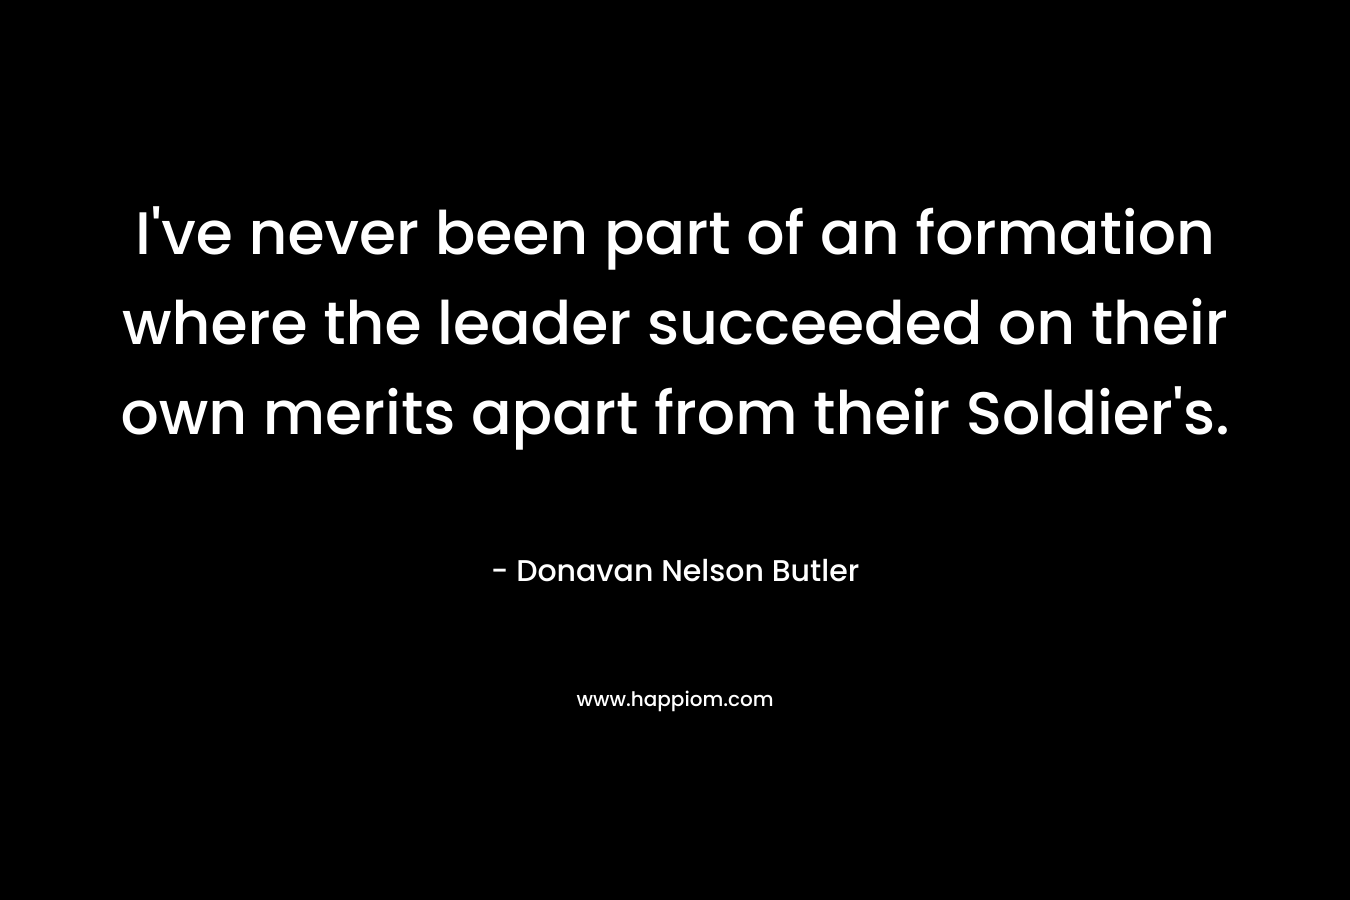 I've never been part of an formation where the leader succeeded on their own merits apart from their Soldier's.